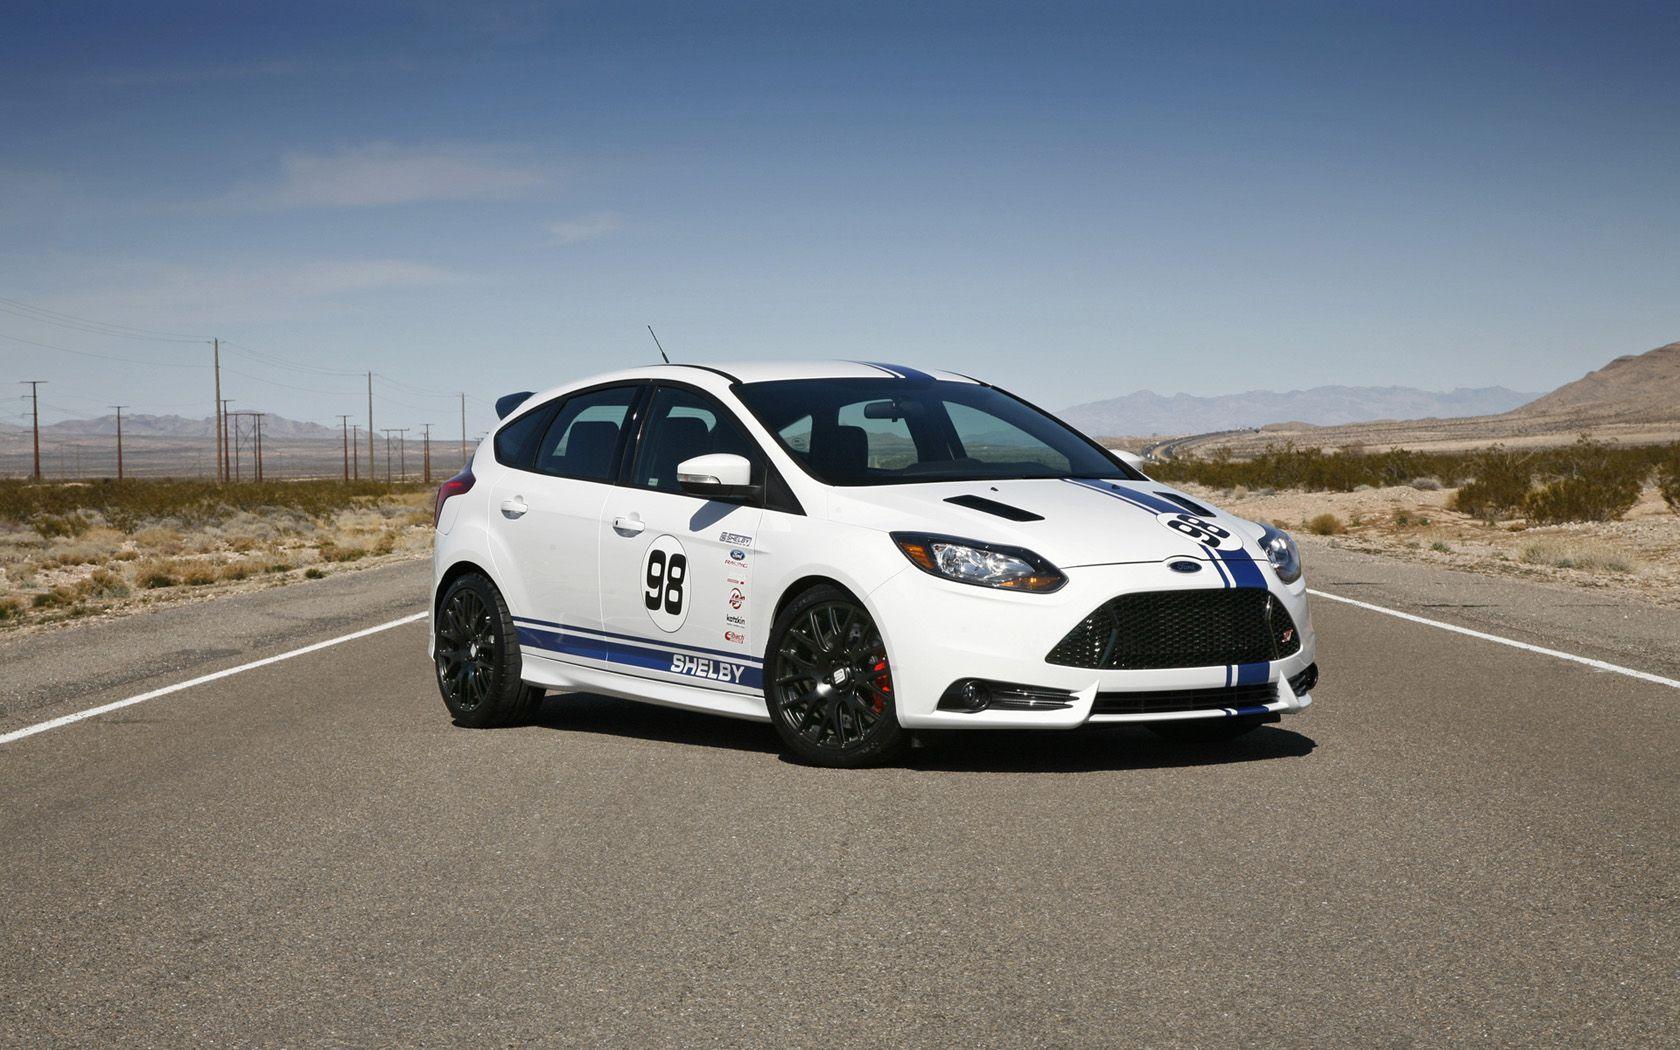 White Ford Focus St Wallpaper For Android. Lovely Cars